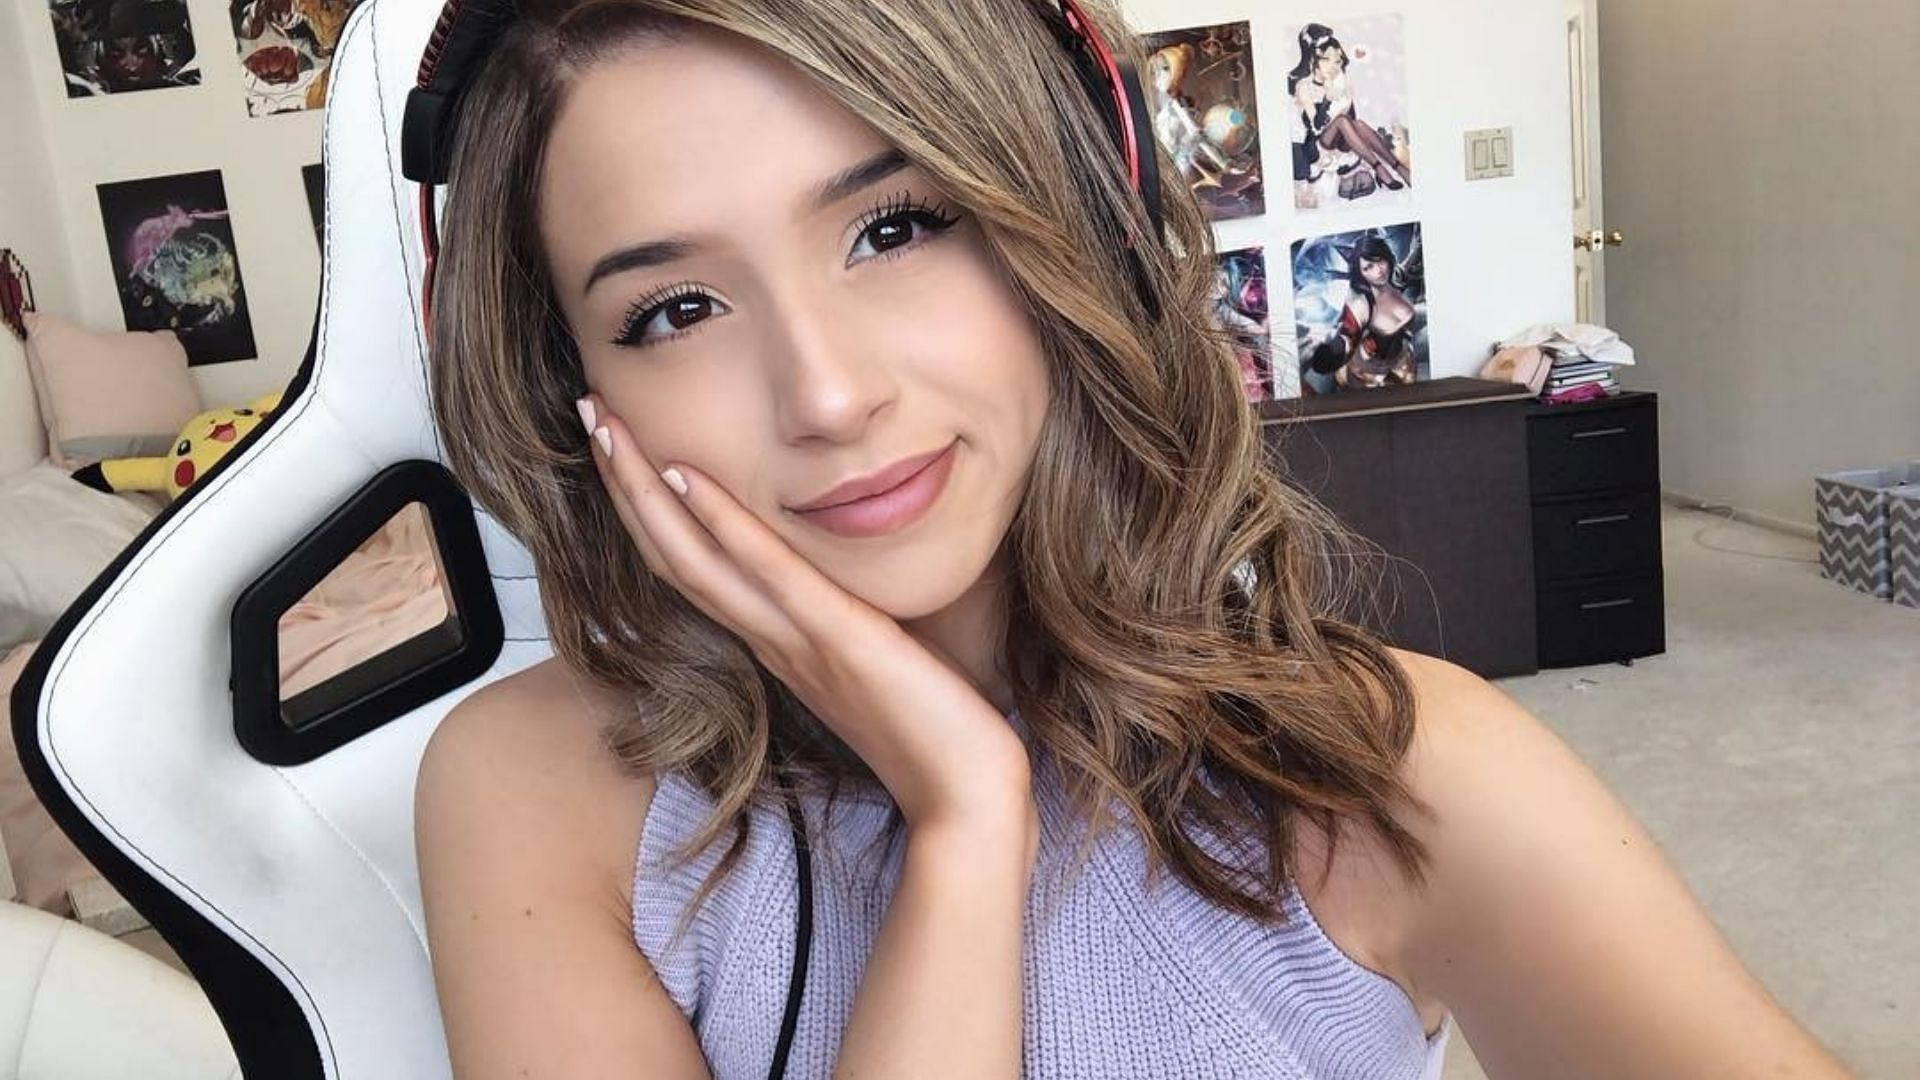 Pokimane took to Twitter to discuss an issue close to home (image via pokimanelol/Twitter)